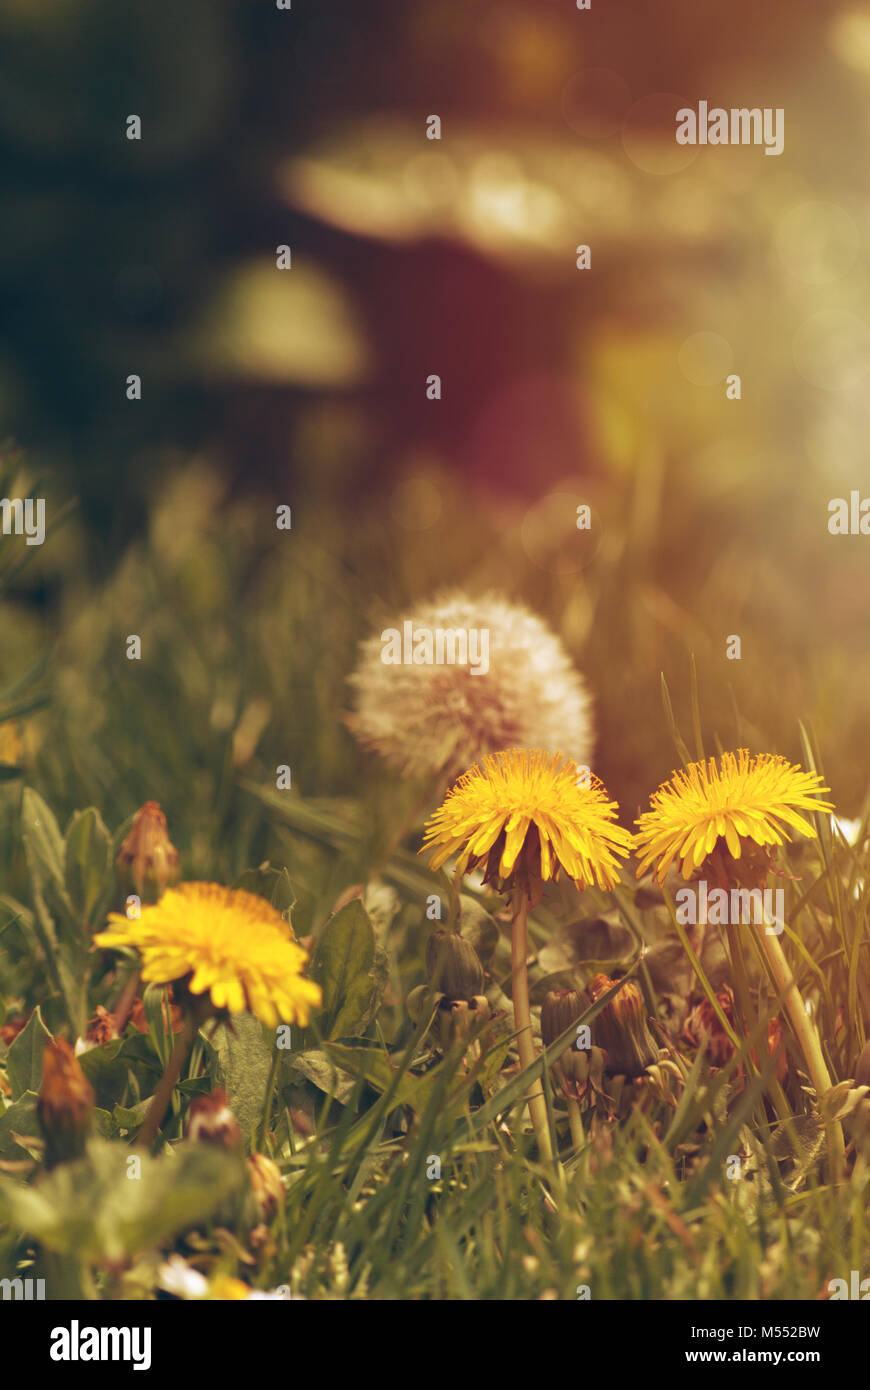 Close up of yellow dandelions growing in grass with white seed head behind, bathed in golden misty light. Stock Photo